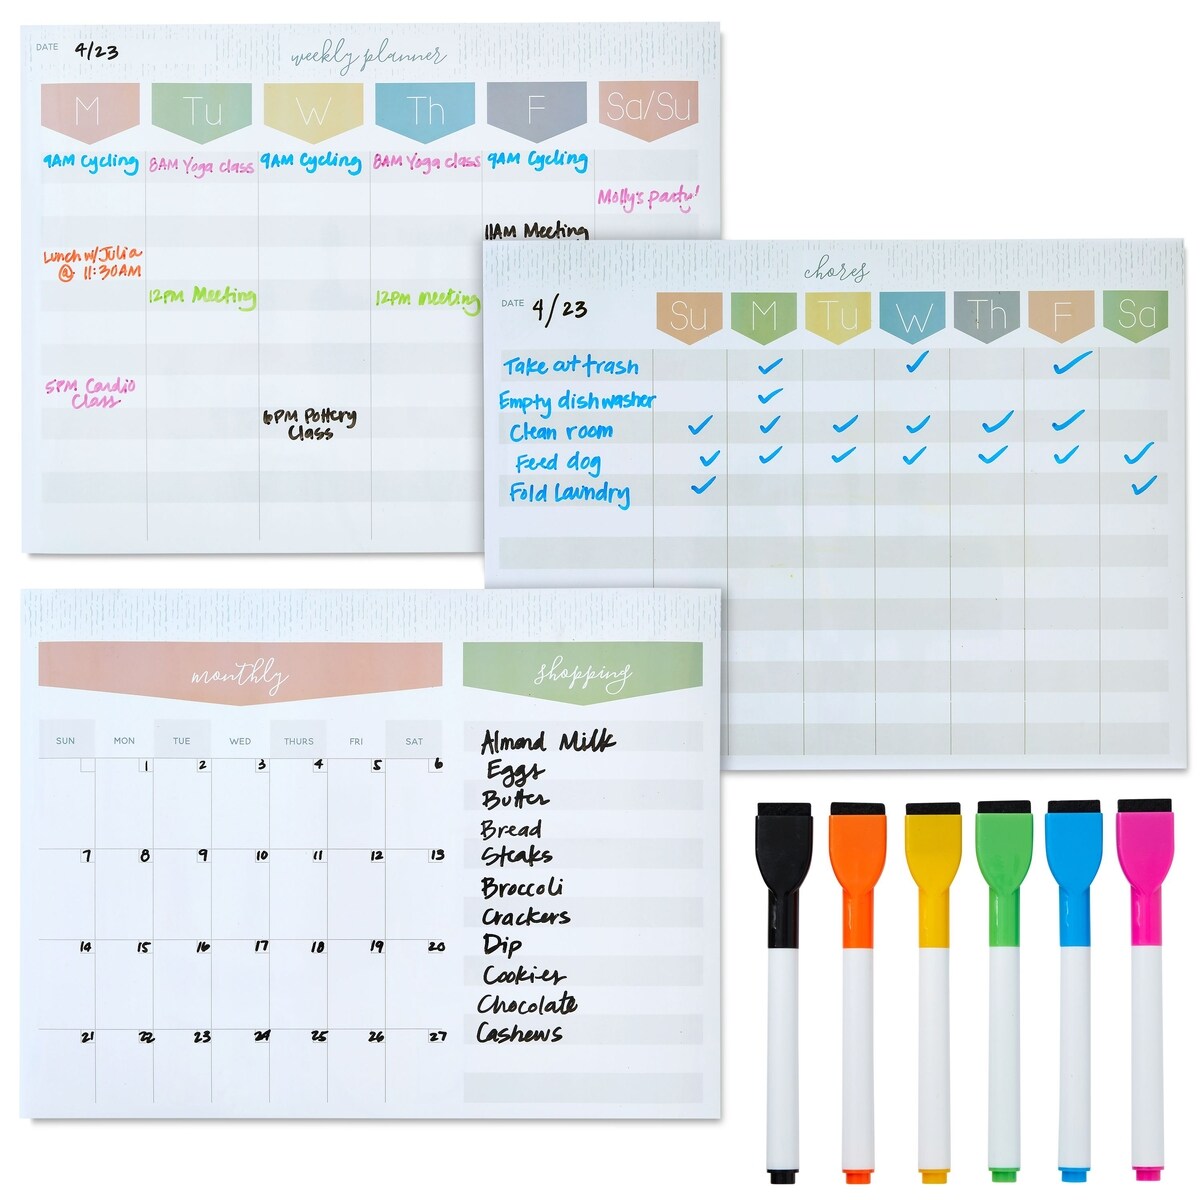 Acrylic Dry Erase Wall Menu Board for Kitchen Weekly Meal Planner & Lists